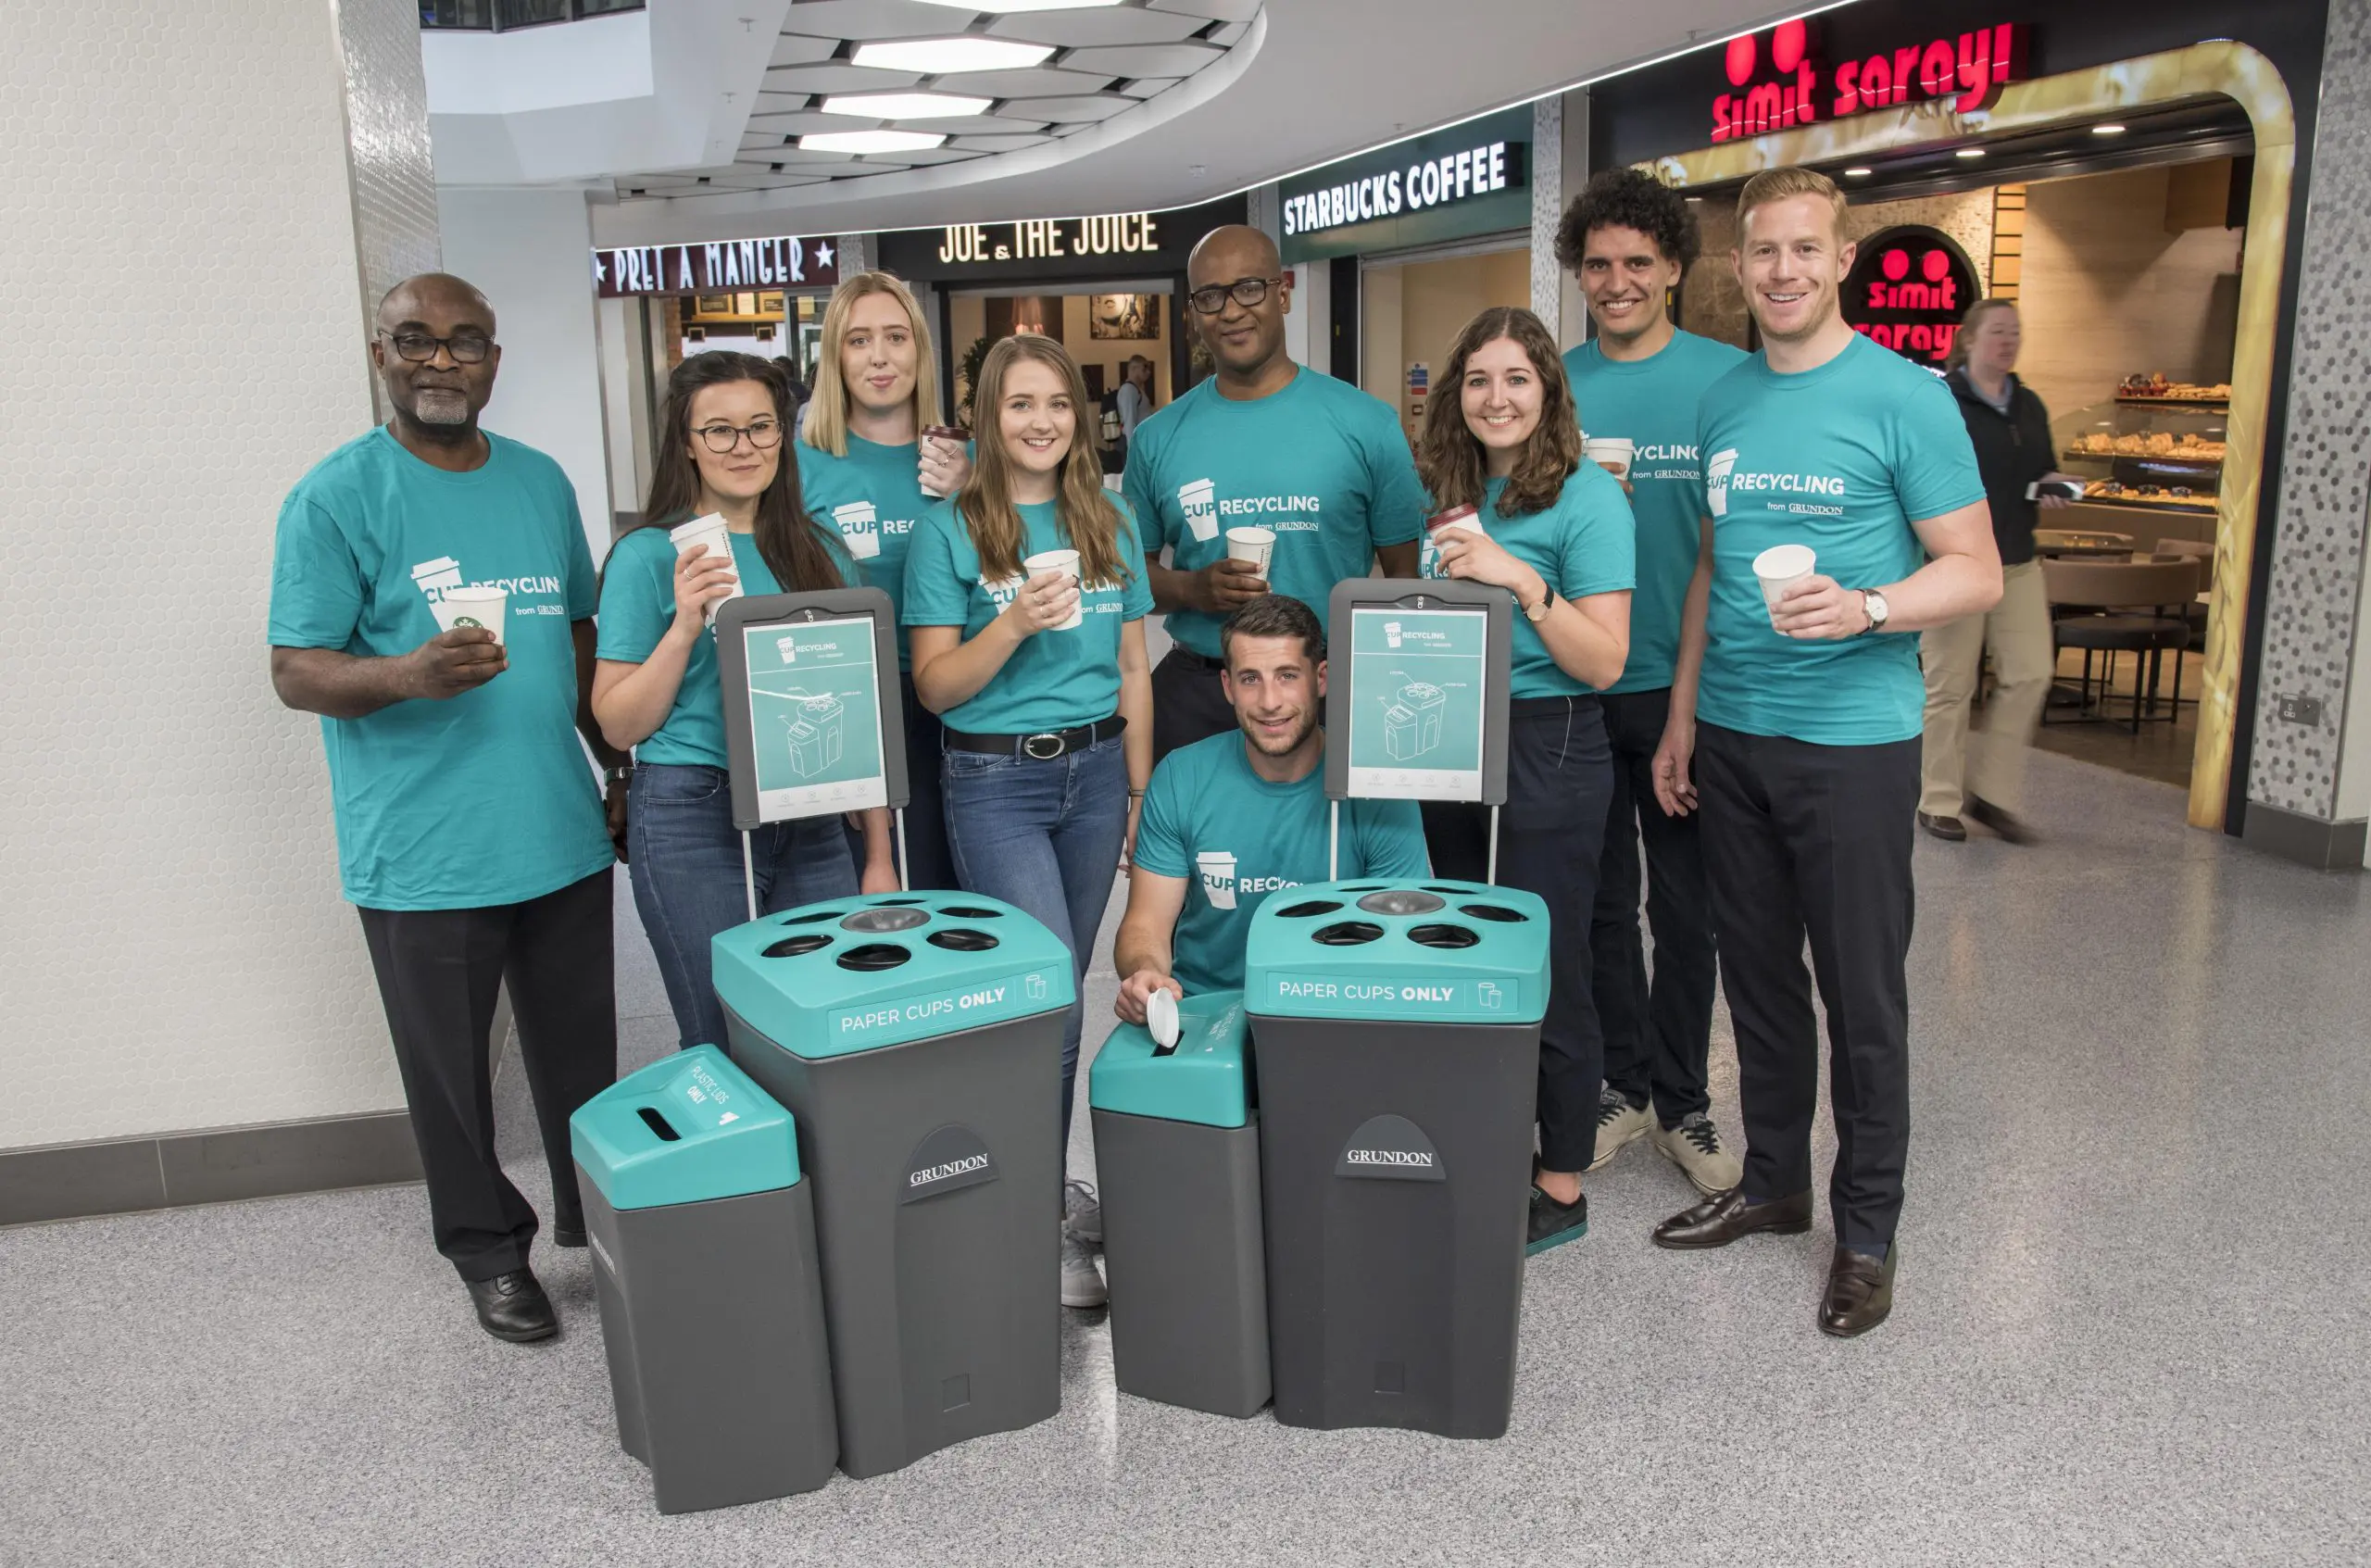 Grundon joined the West One team to launch the new cup recycling service at the shopping centre